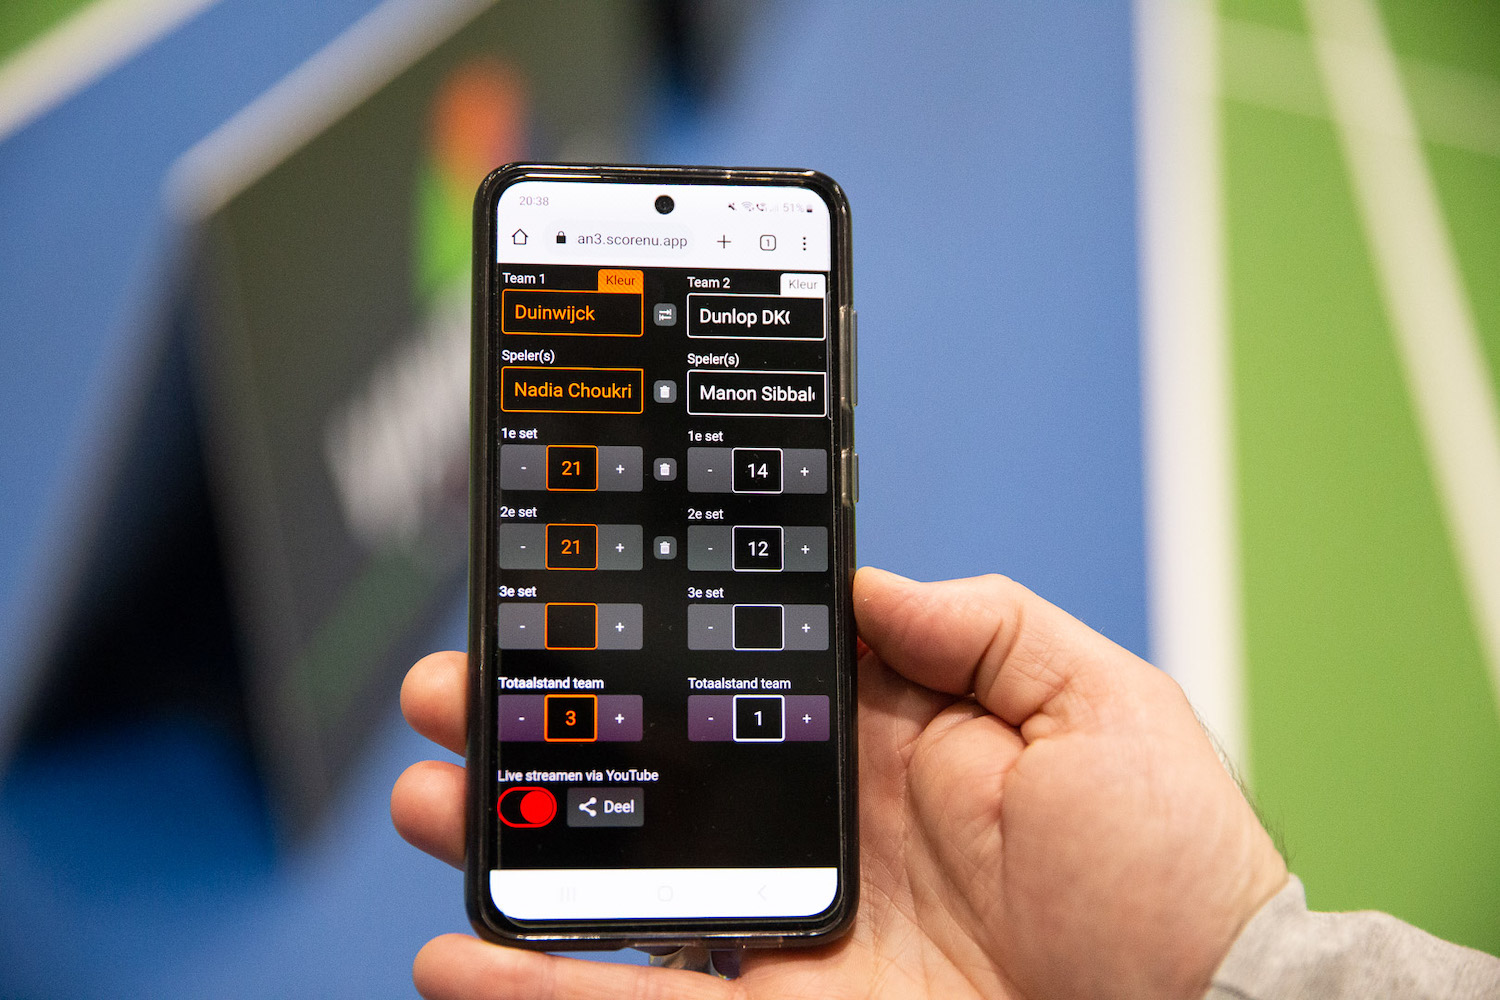 The remote control works on any mobile phone